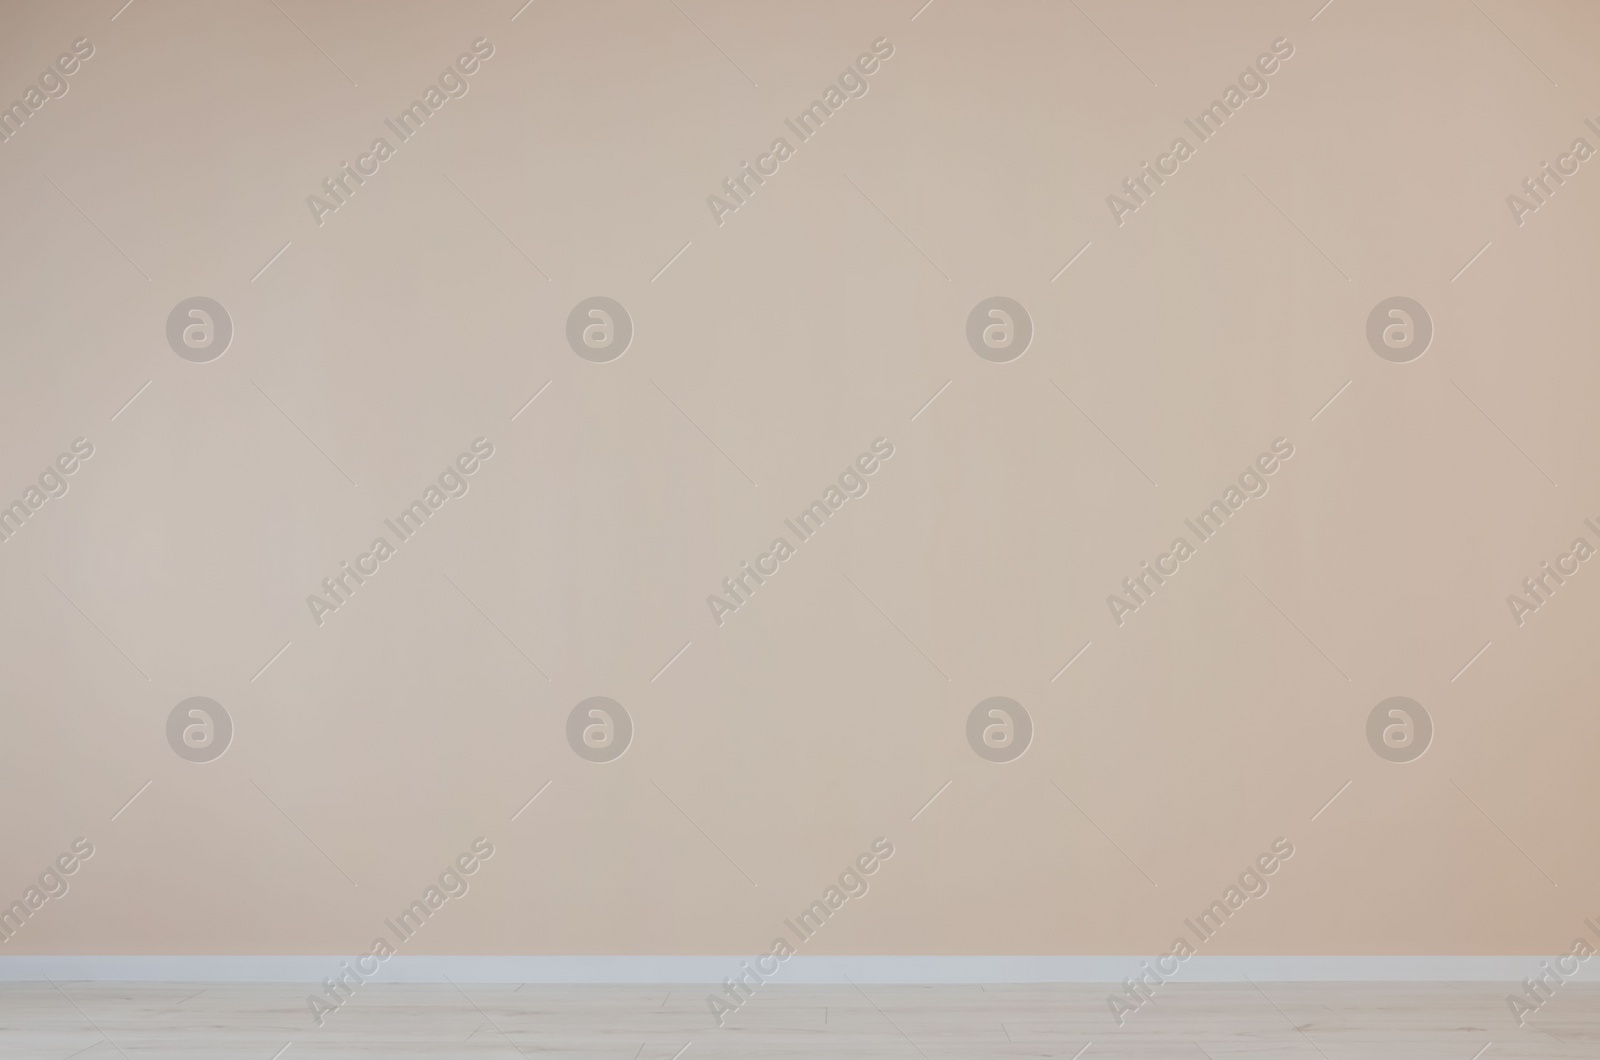 Photo of Pale orange wall with power outlet sockets in empty room